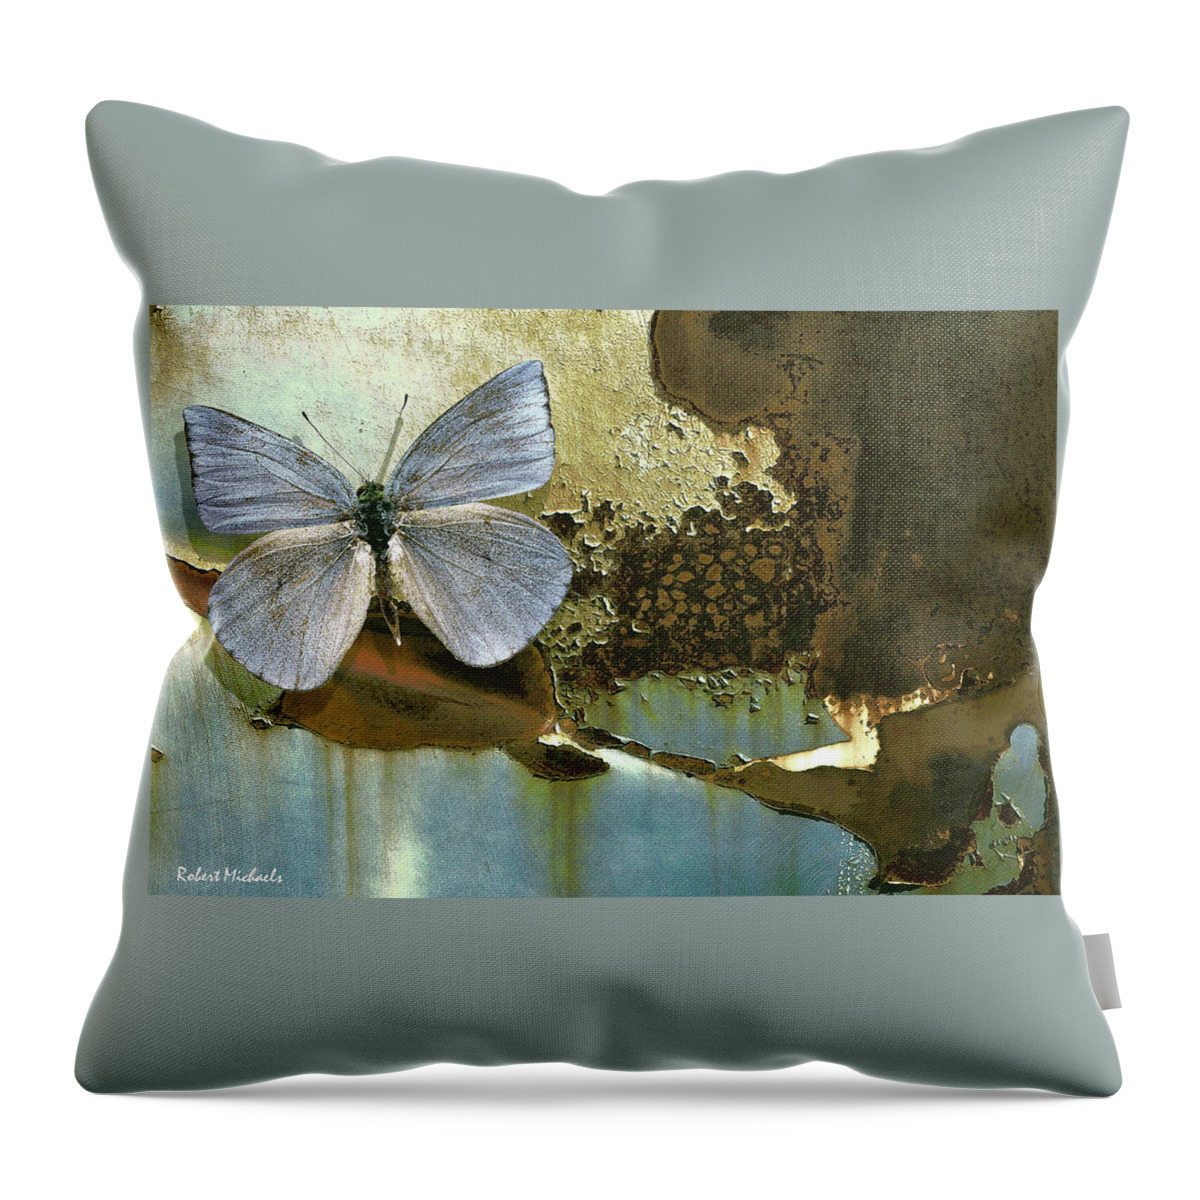 Butterfly Throw Pillow featuring the photograph Organic Butterfly #1 by Robert Michaels